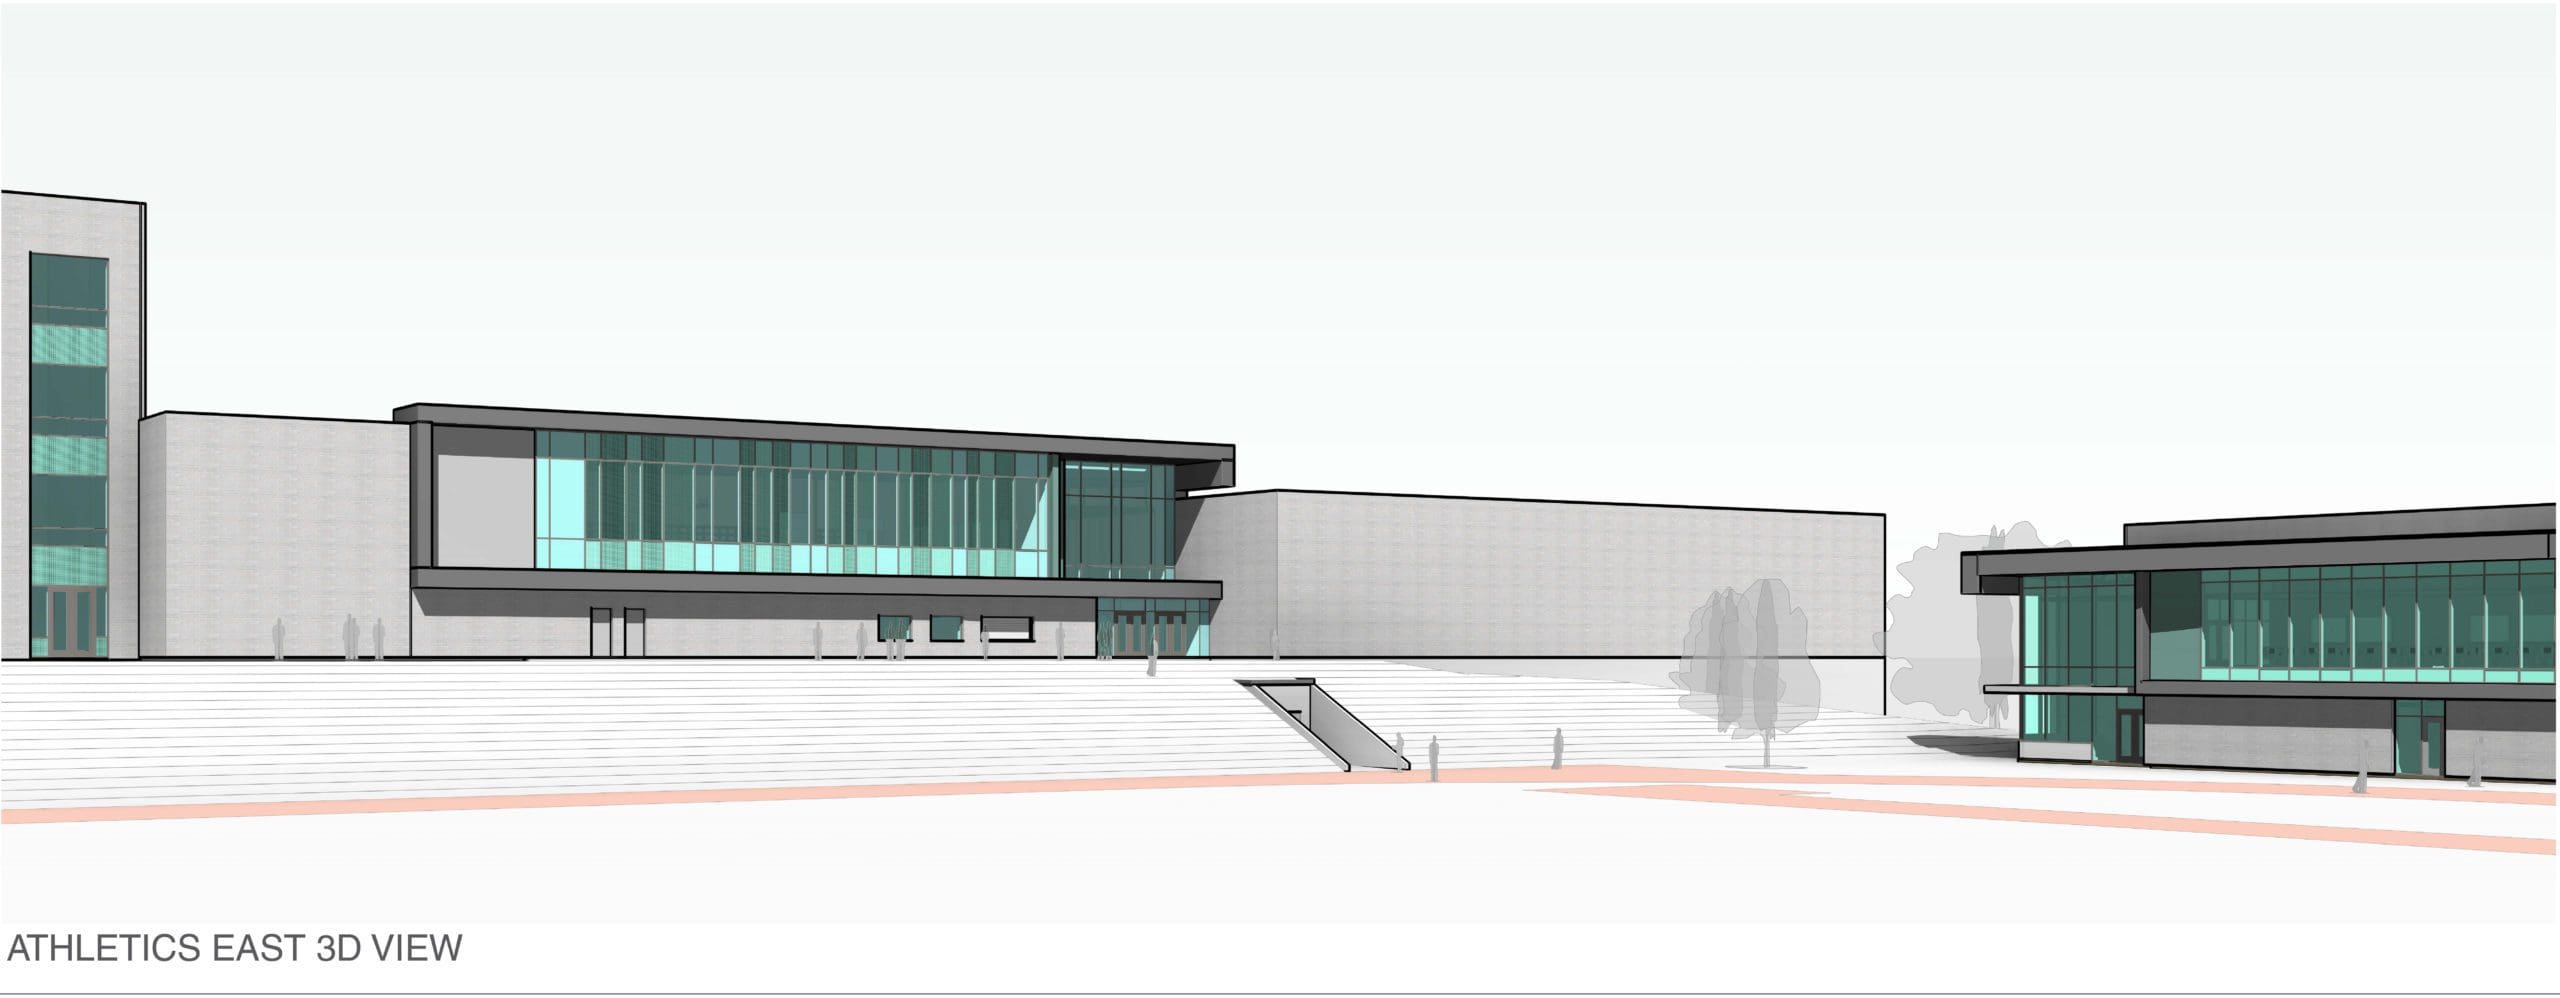 Hillcrest High School Coming in 2021 - FFKR Architects